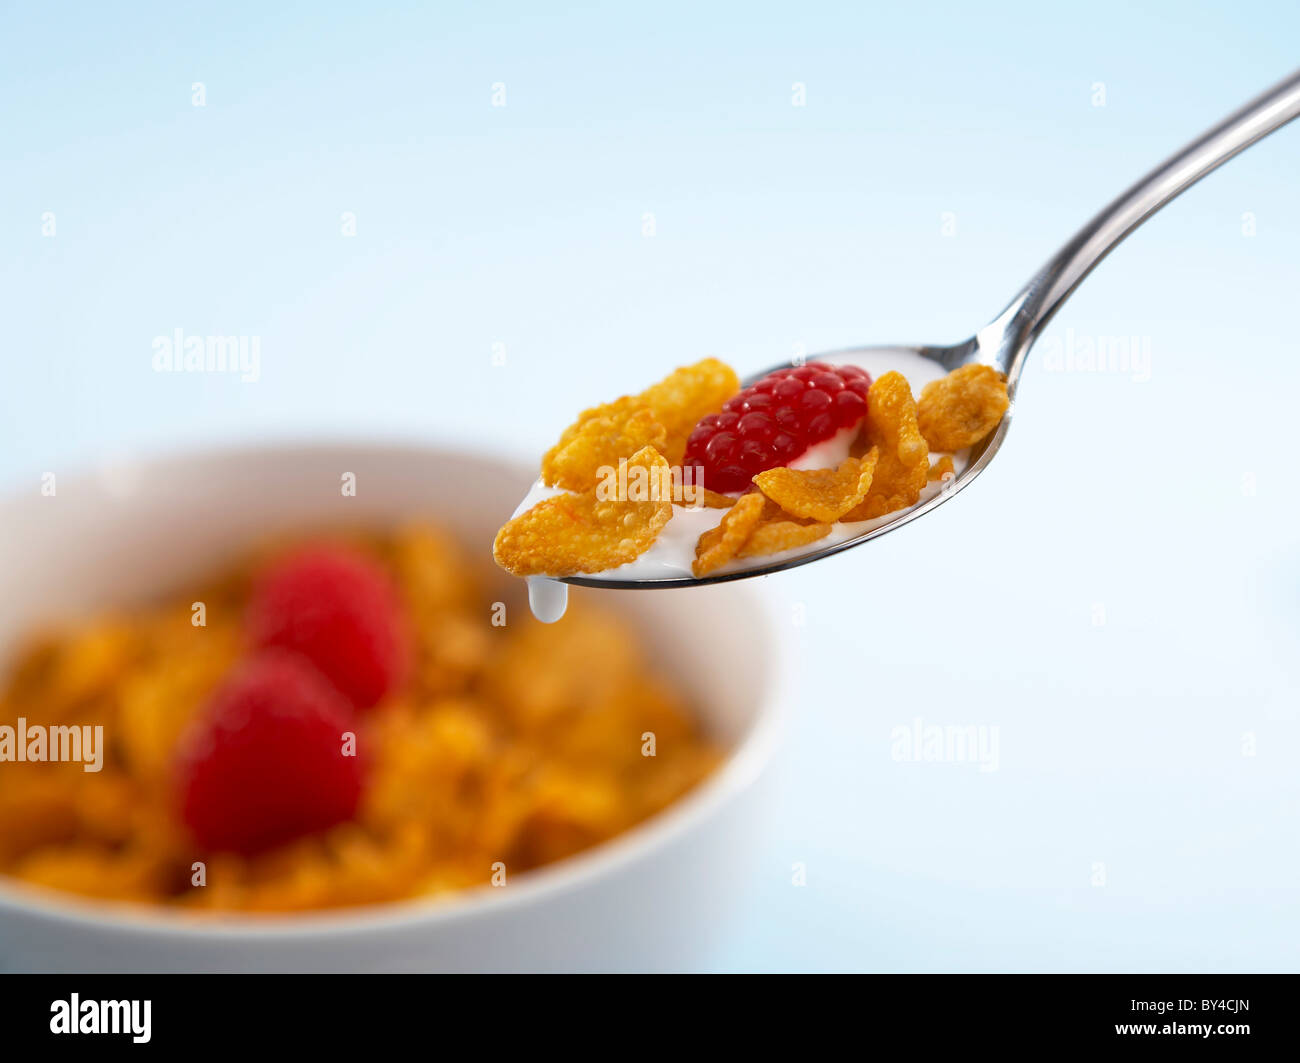 Spoonful breakfast Cereal with Raspberries Stock Photo